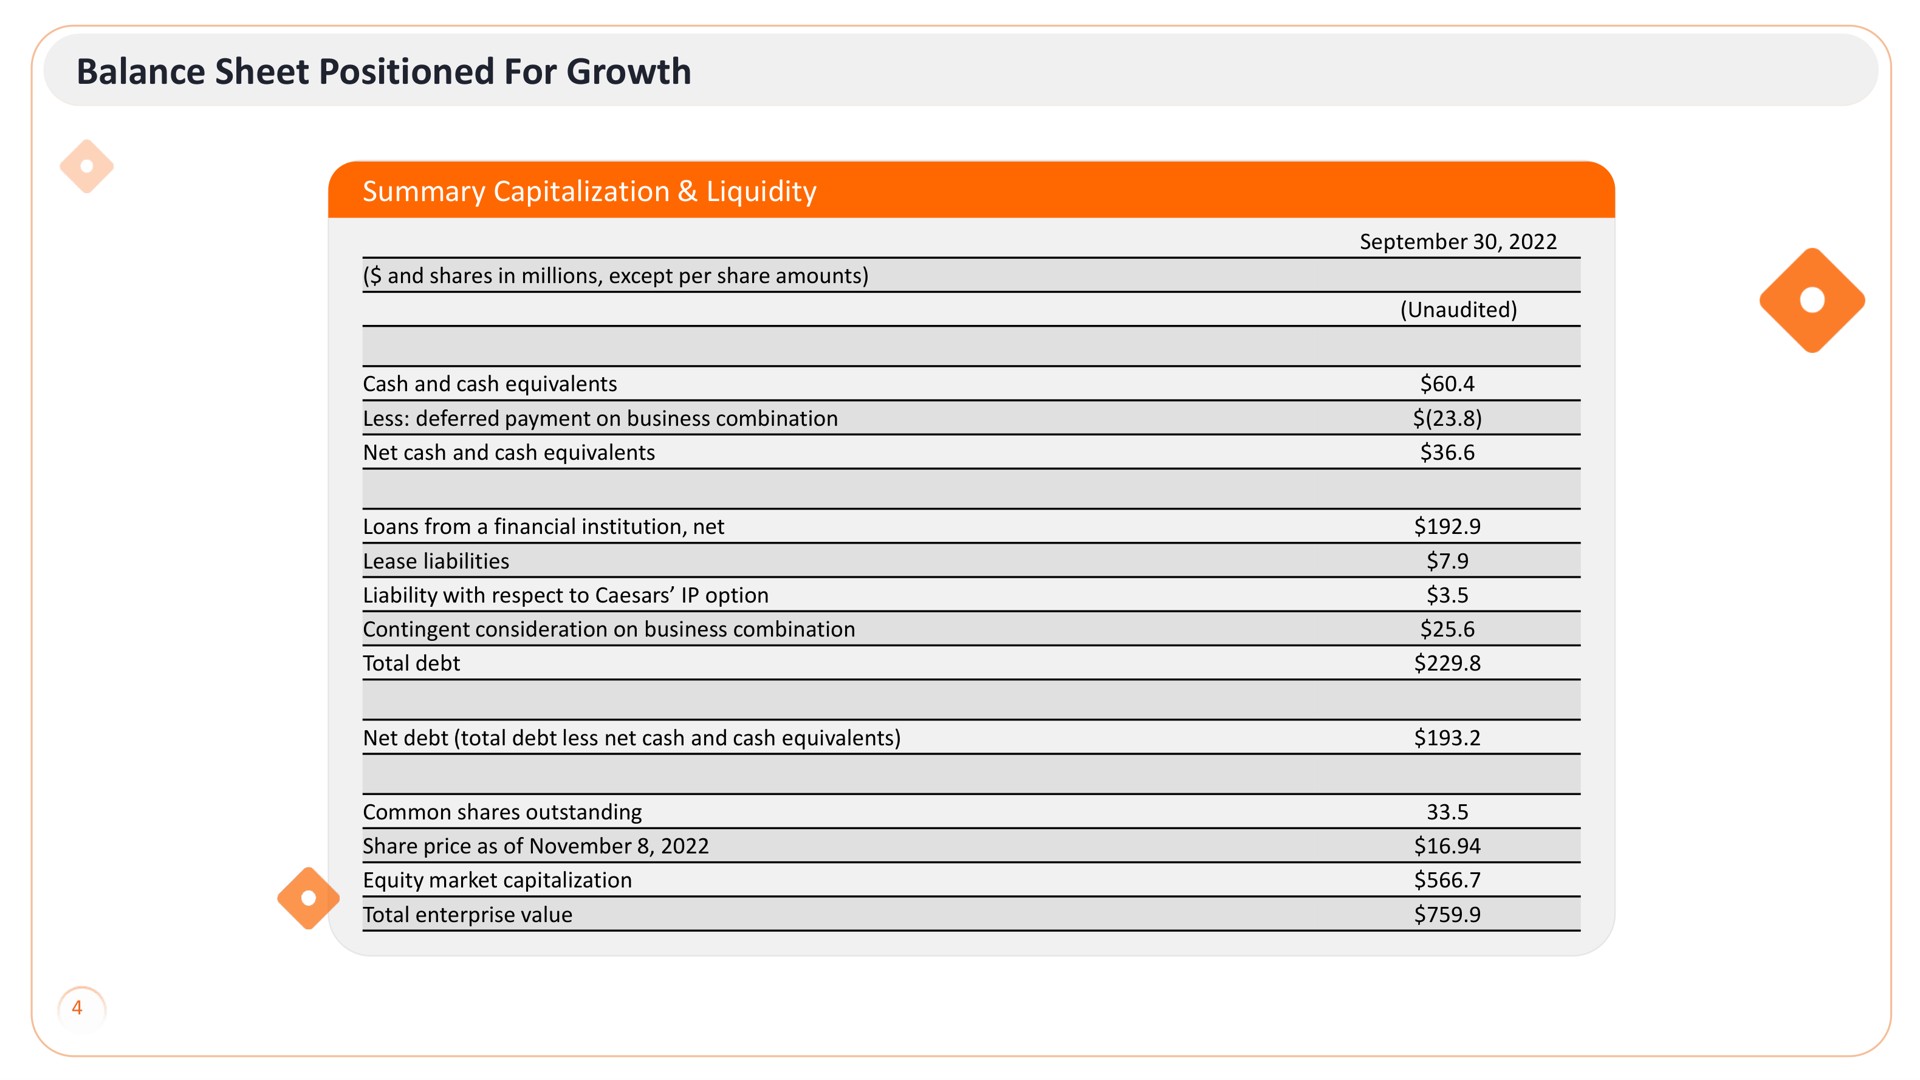 balance sheet positioned for growth summary capitalization liquidity | Neogames